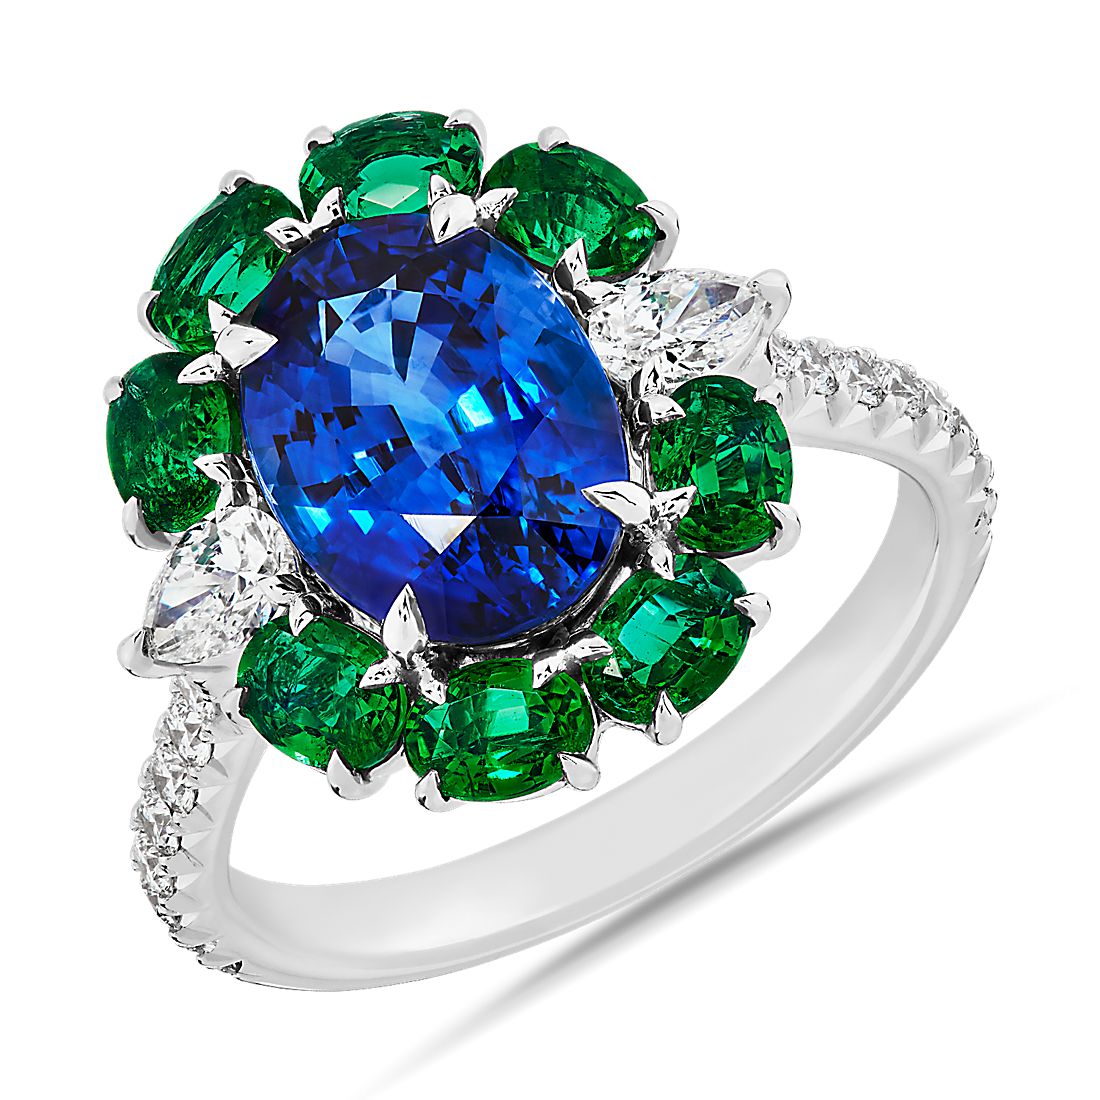 Blue Sapphire and Emerald Ring with Diamond Details in 18k White Gold